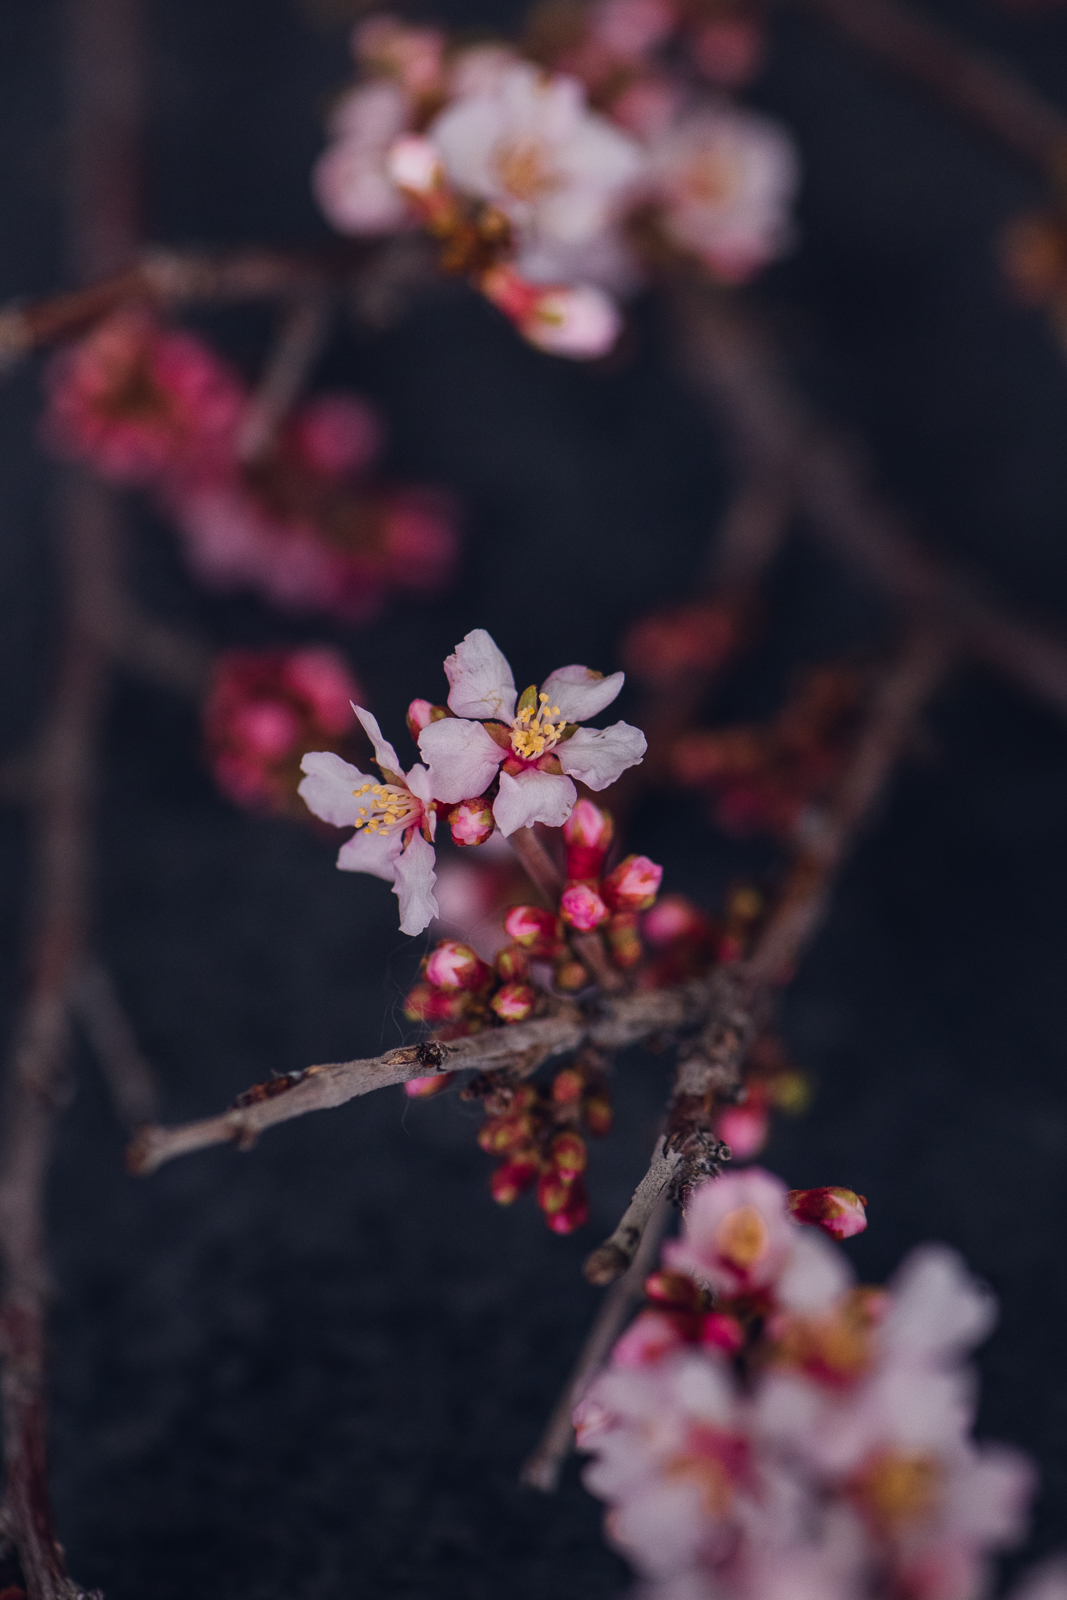 macro image of cherry blossom branch with pink flowers